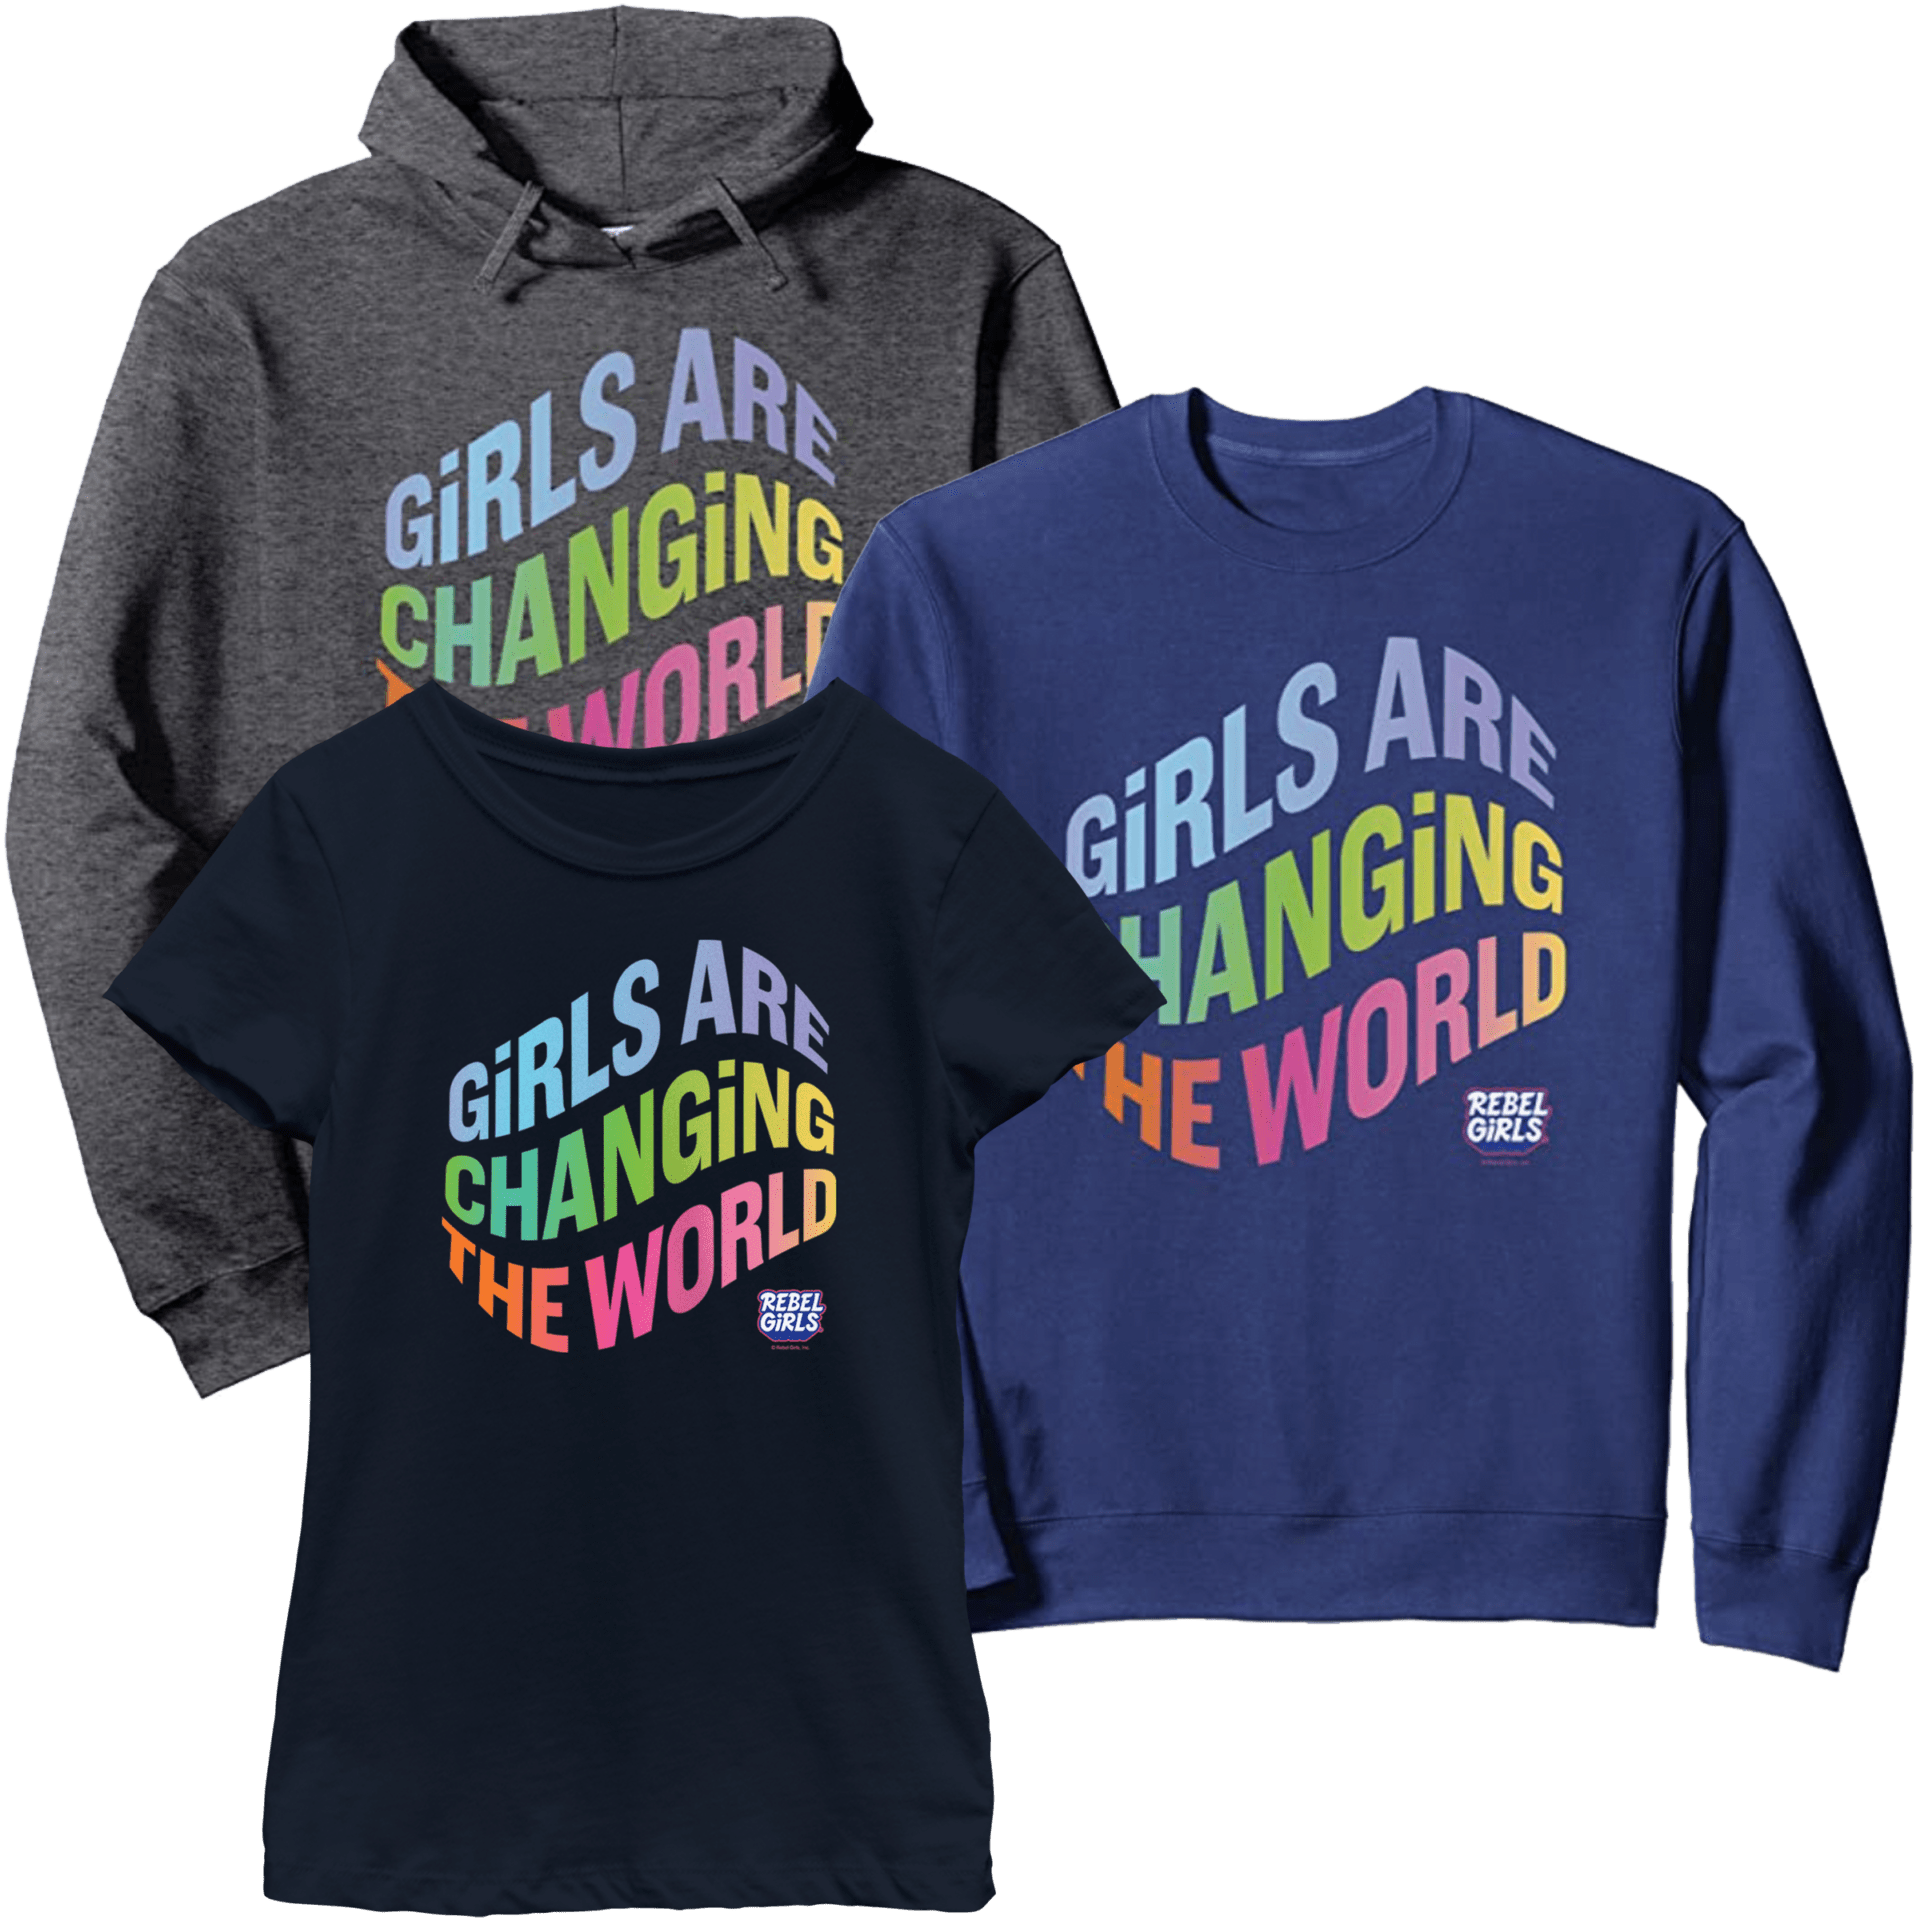 “Girls are Changing the World” Tees and Tops - thumbnail no 1